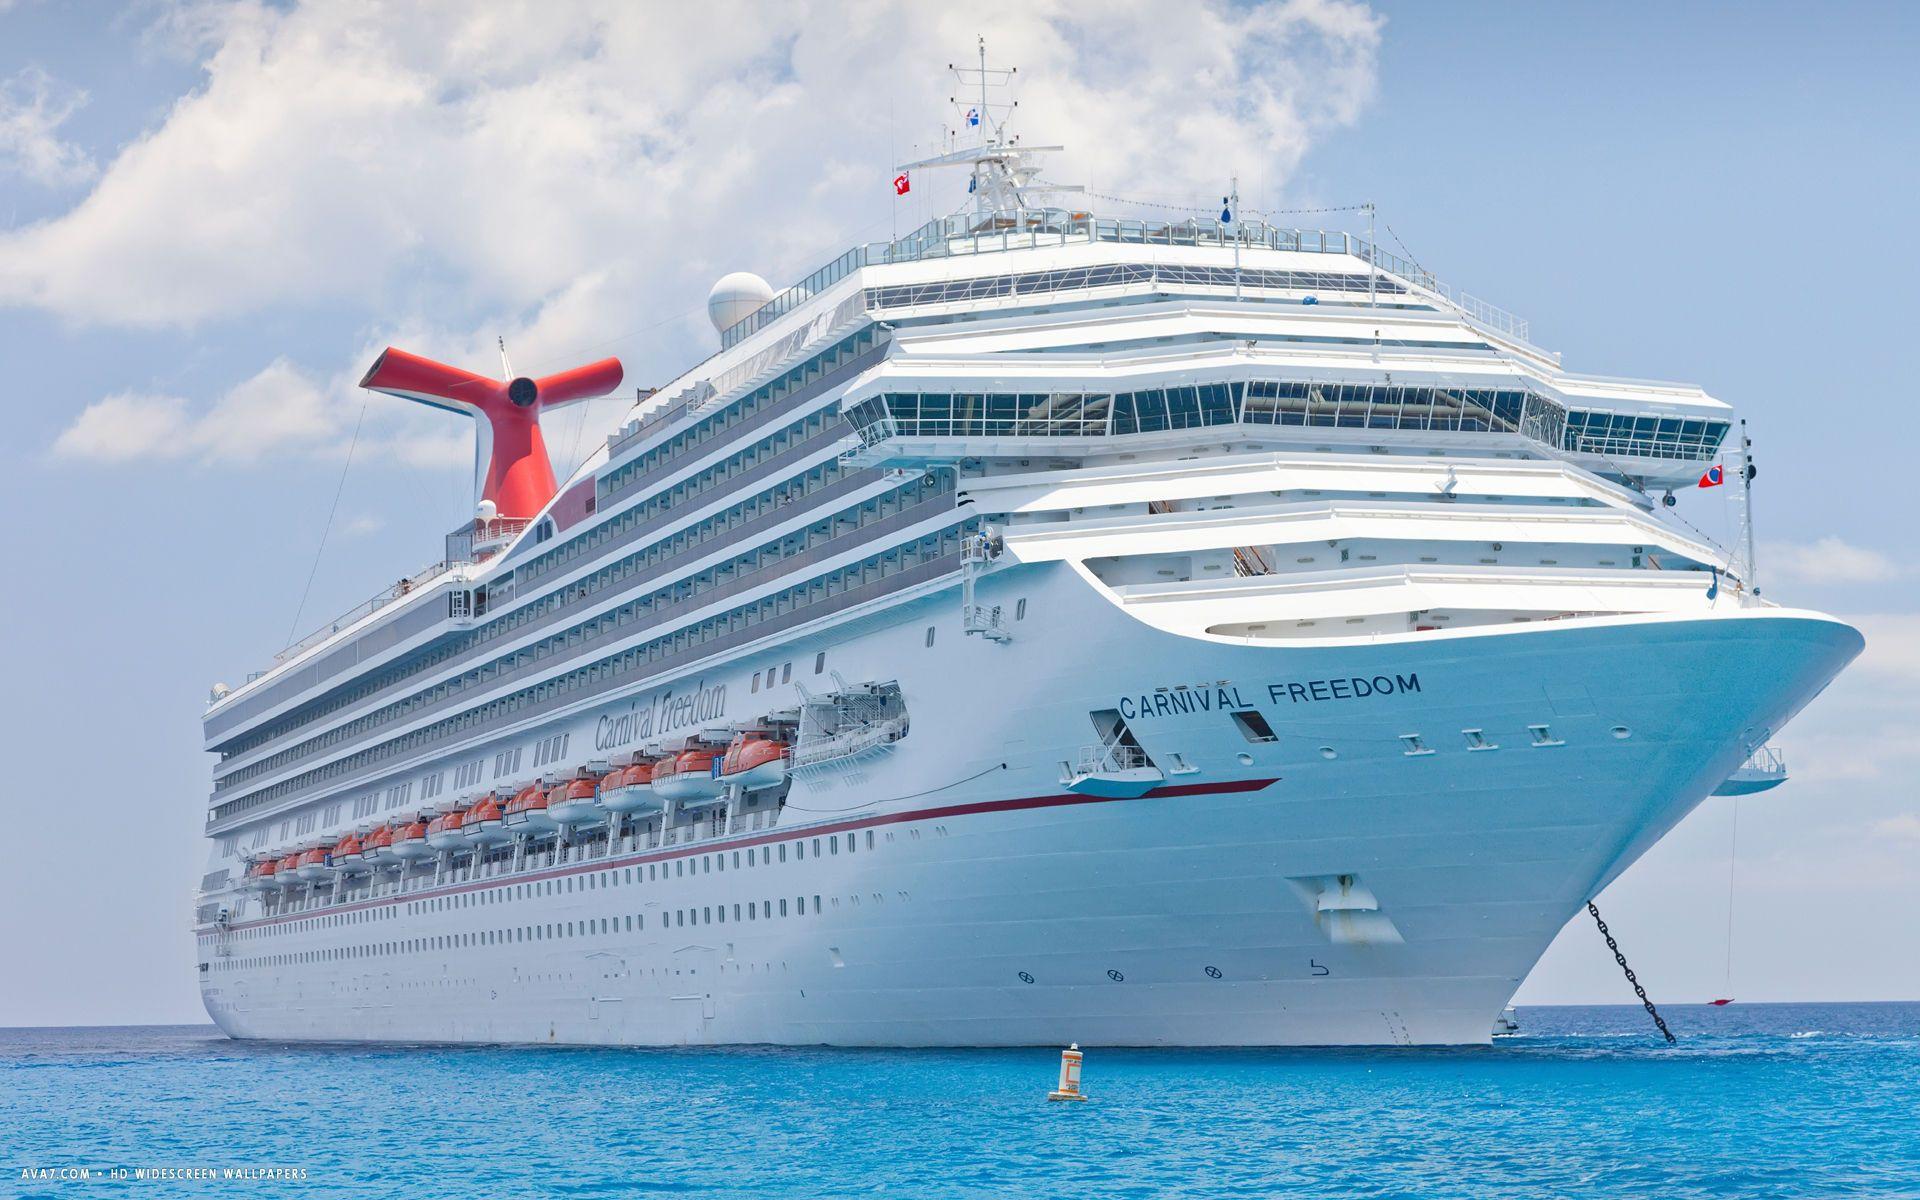 carnival freedom cruise ship hd widescreen wallpapers / cruise